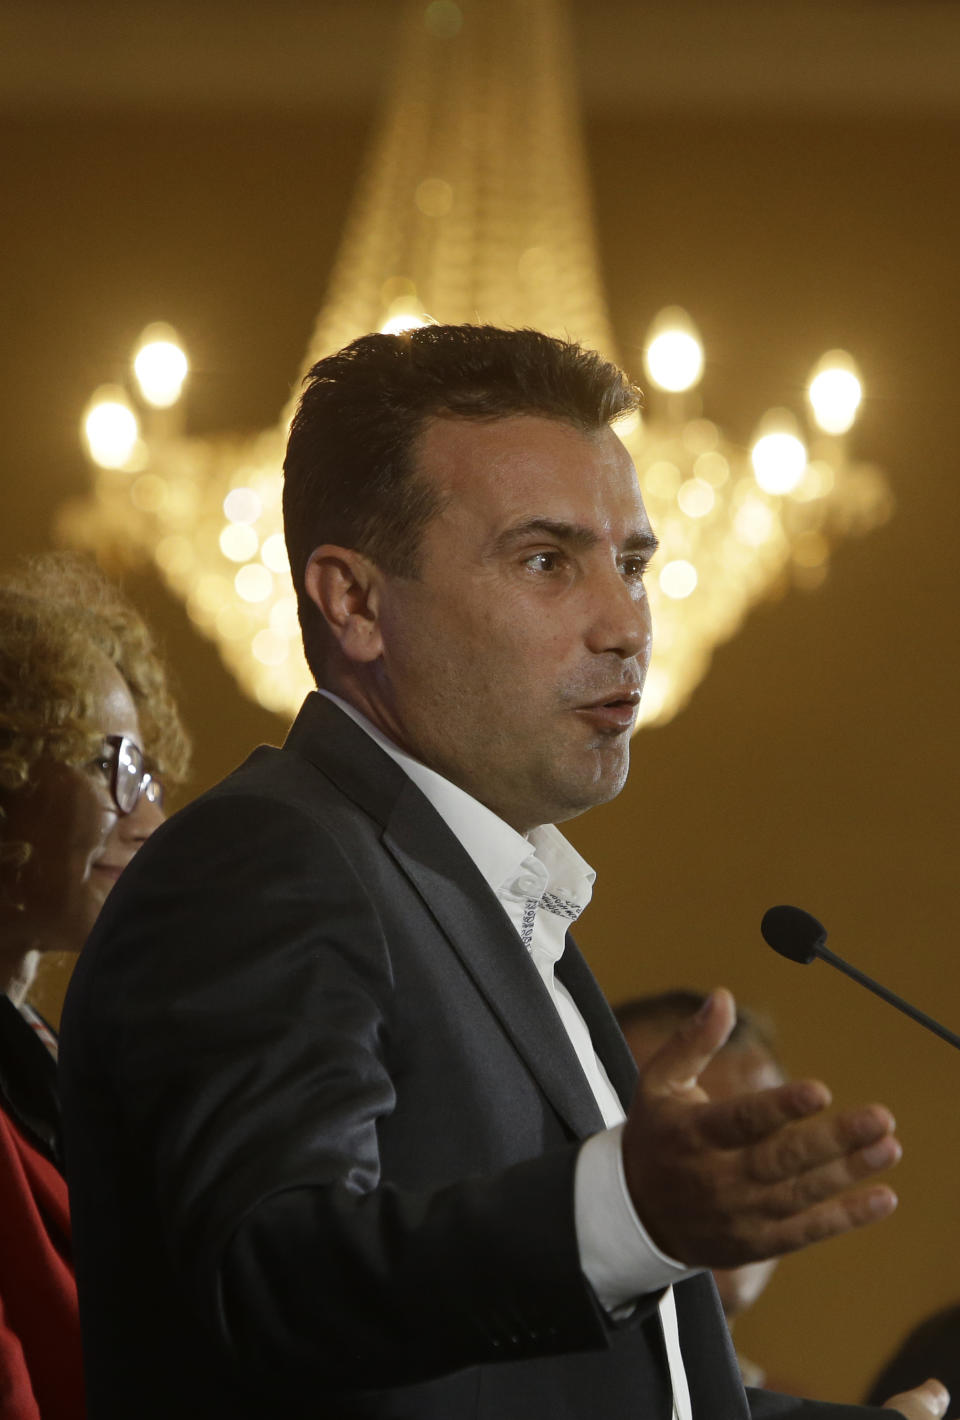 Macedonia's Prime Minister Zoran Zaev talks to members of the media during a news conference about the referendum in Skopje, Macedonia, late Sunday, Sept. 30, 2018. Zaev has described the crucial referendum on changing the small European country's name to North Macedonia and thereby pave the way to NATO membership as a clear success, despite lower than hoped for voter turnout. Zaev said he had no intention of resigning as the "vast majority" of those who voted Sunday approved the name change. (AP Photo/Boris Grdanoski)